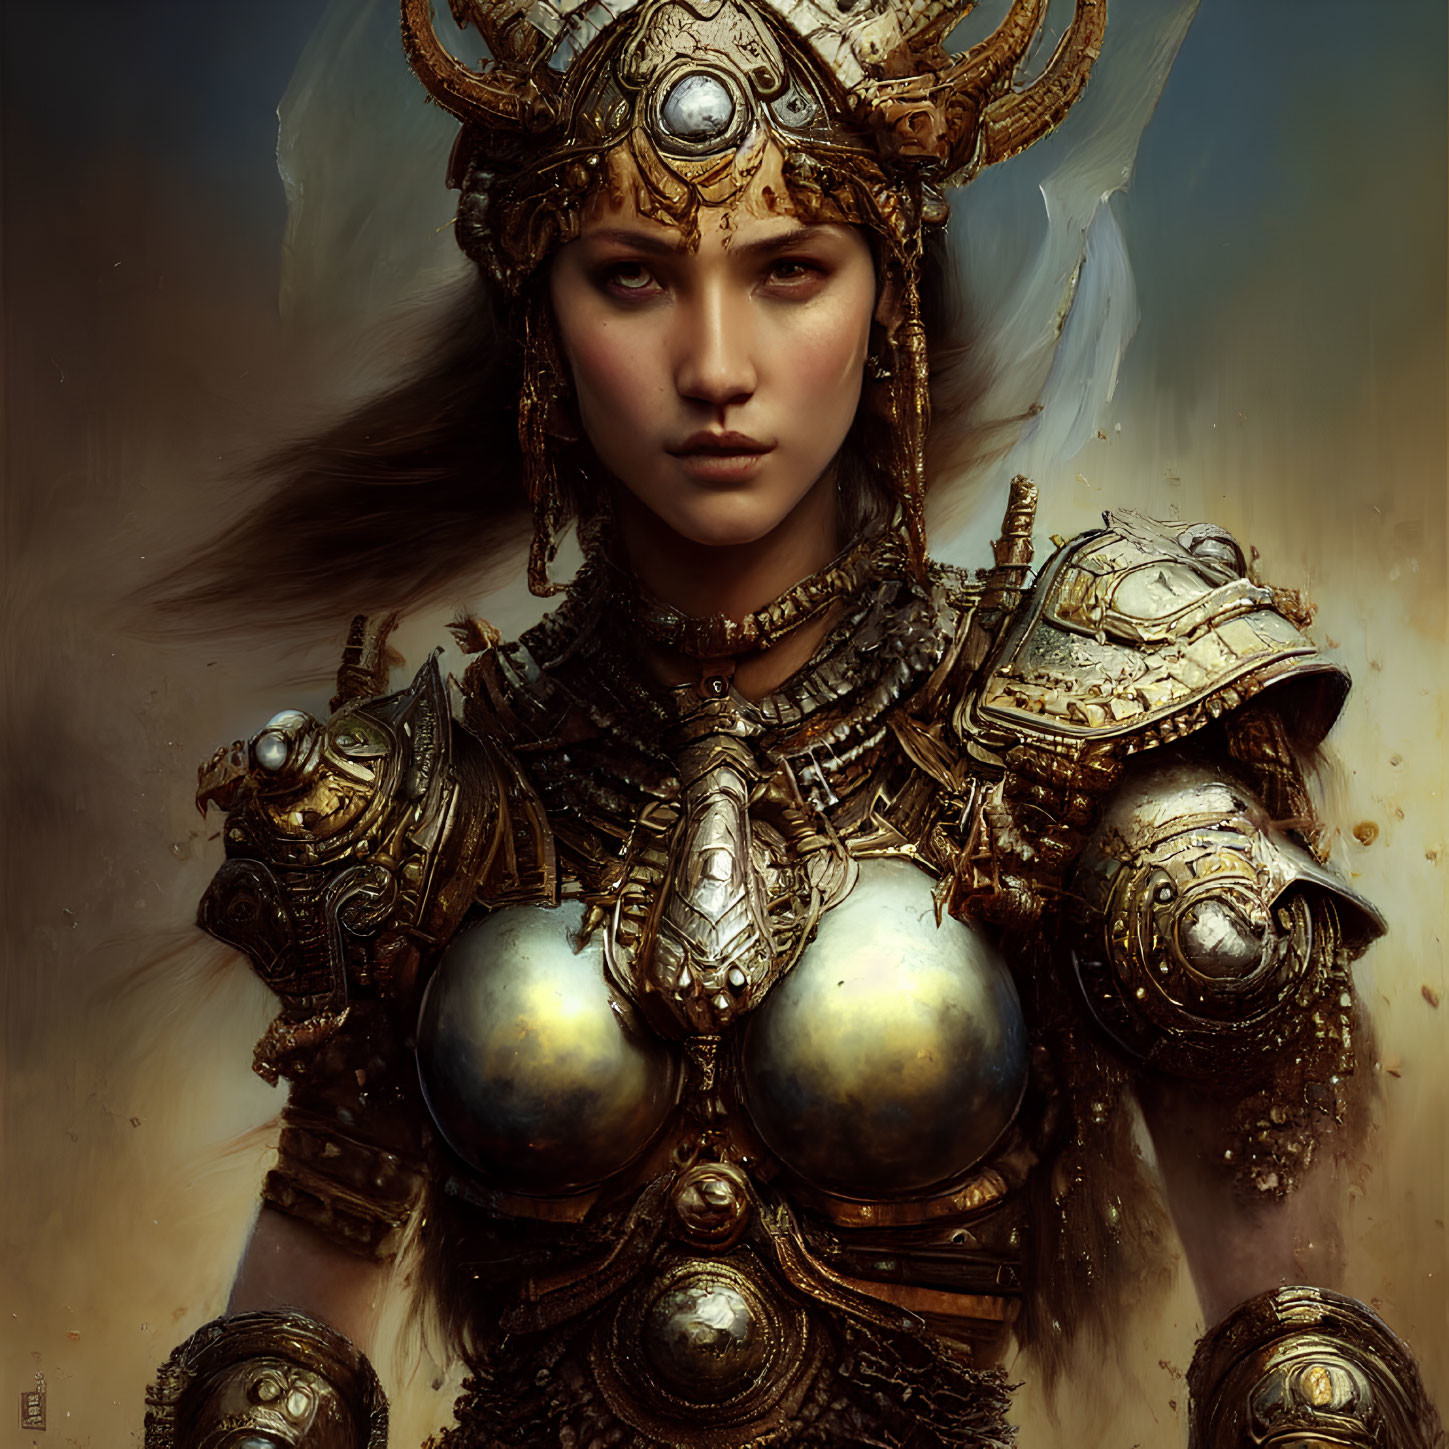 Detailed Woman in Ornate Armor Exuding Strength